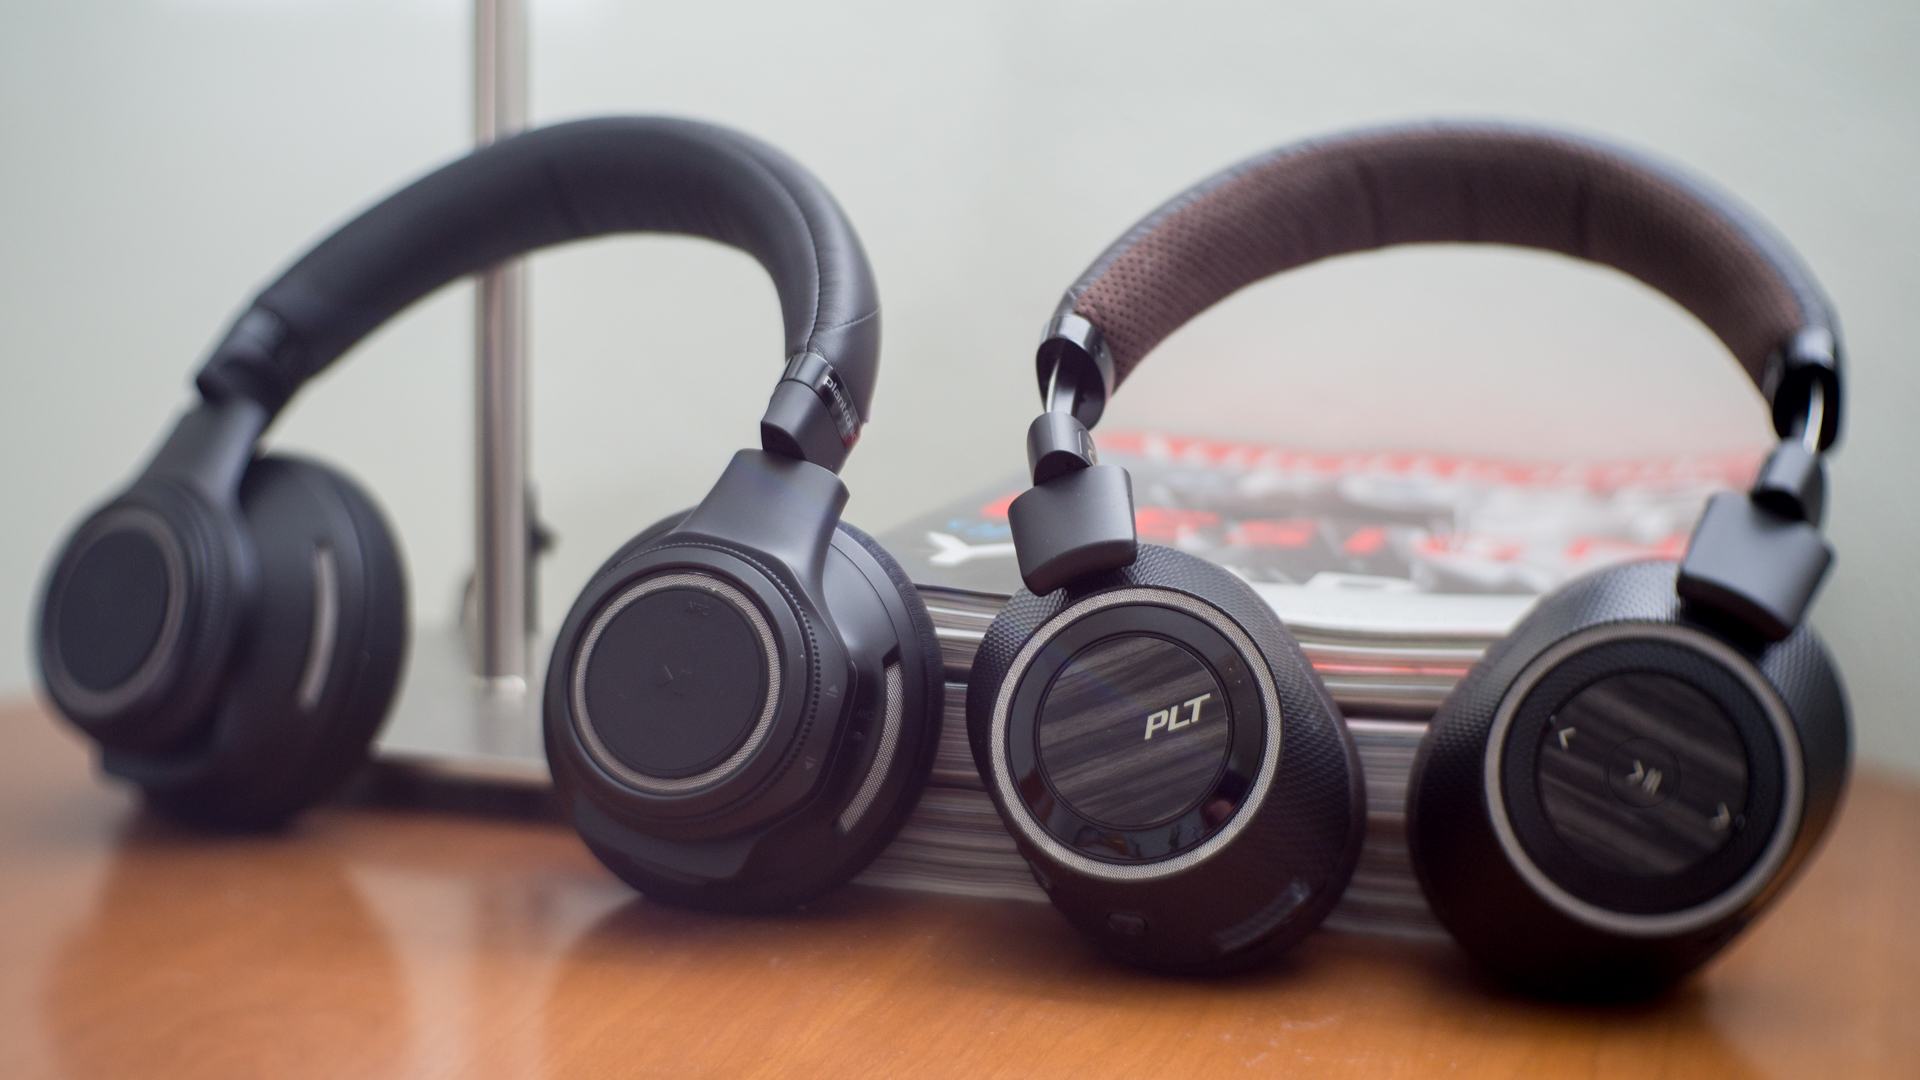 Which headphones (wired or wireless) are better?